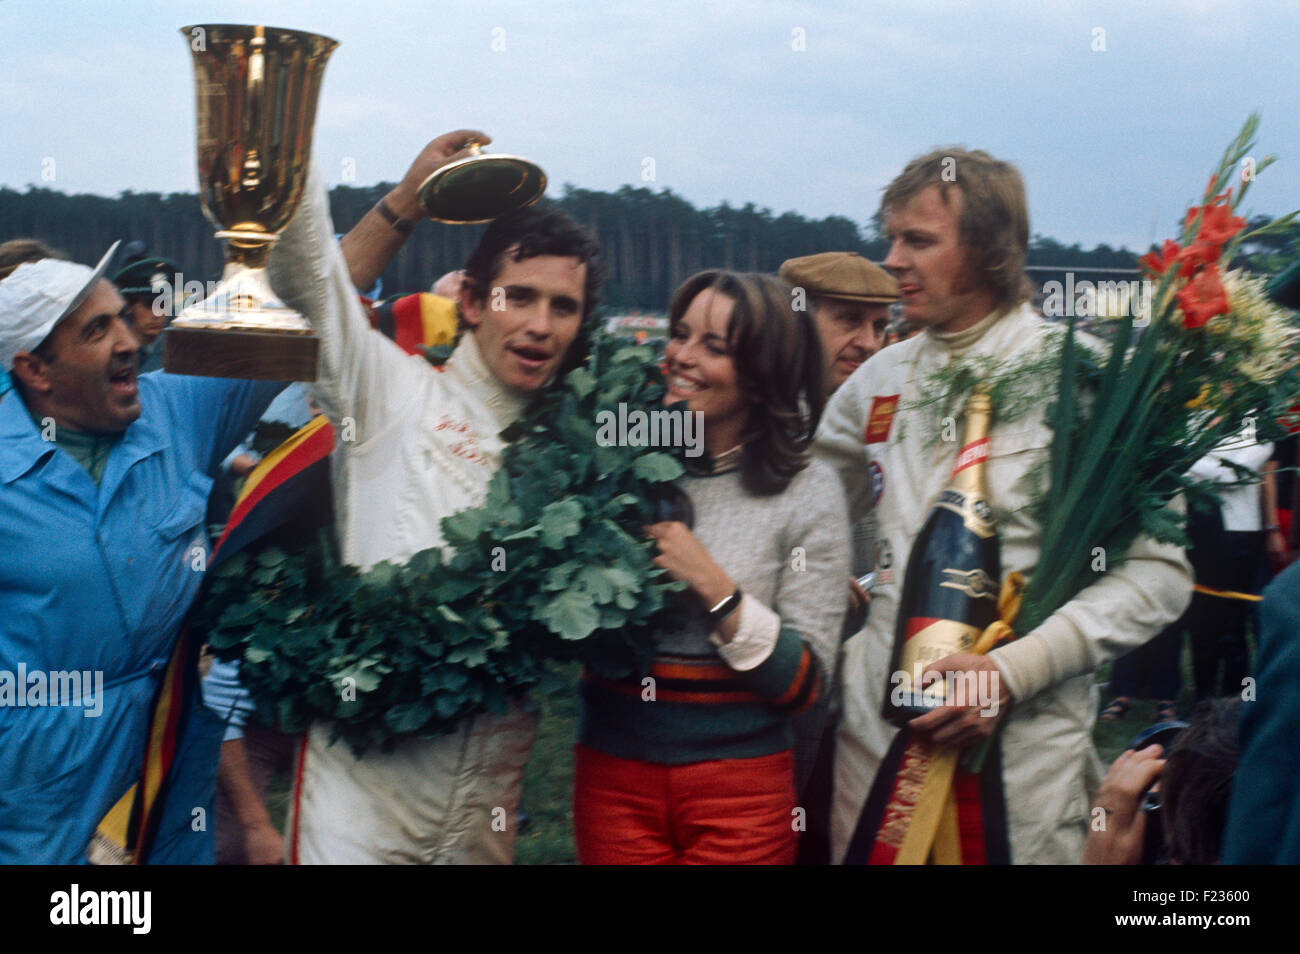 Jacky Ickx and Ronnie Peterson celebrating on the podium 1970s Stock Photo